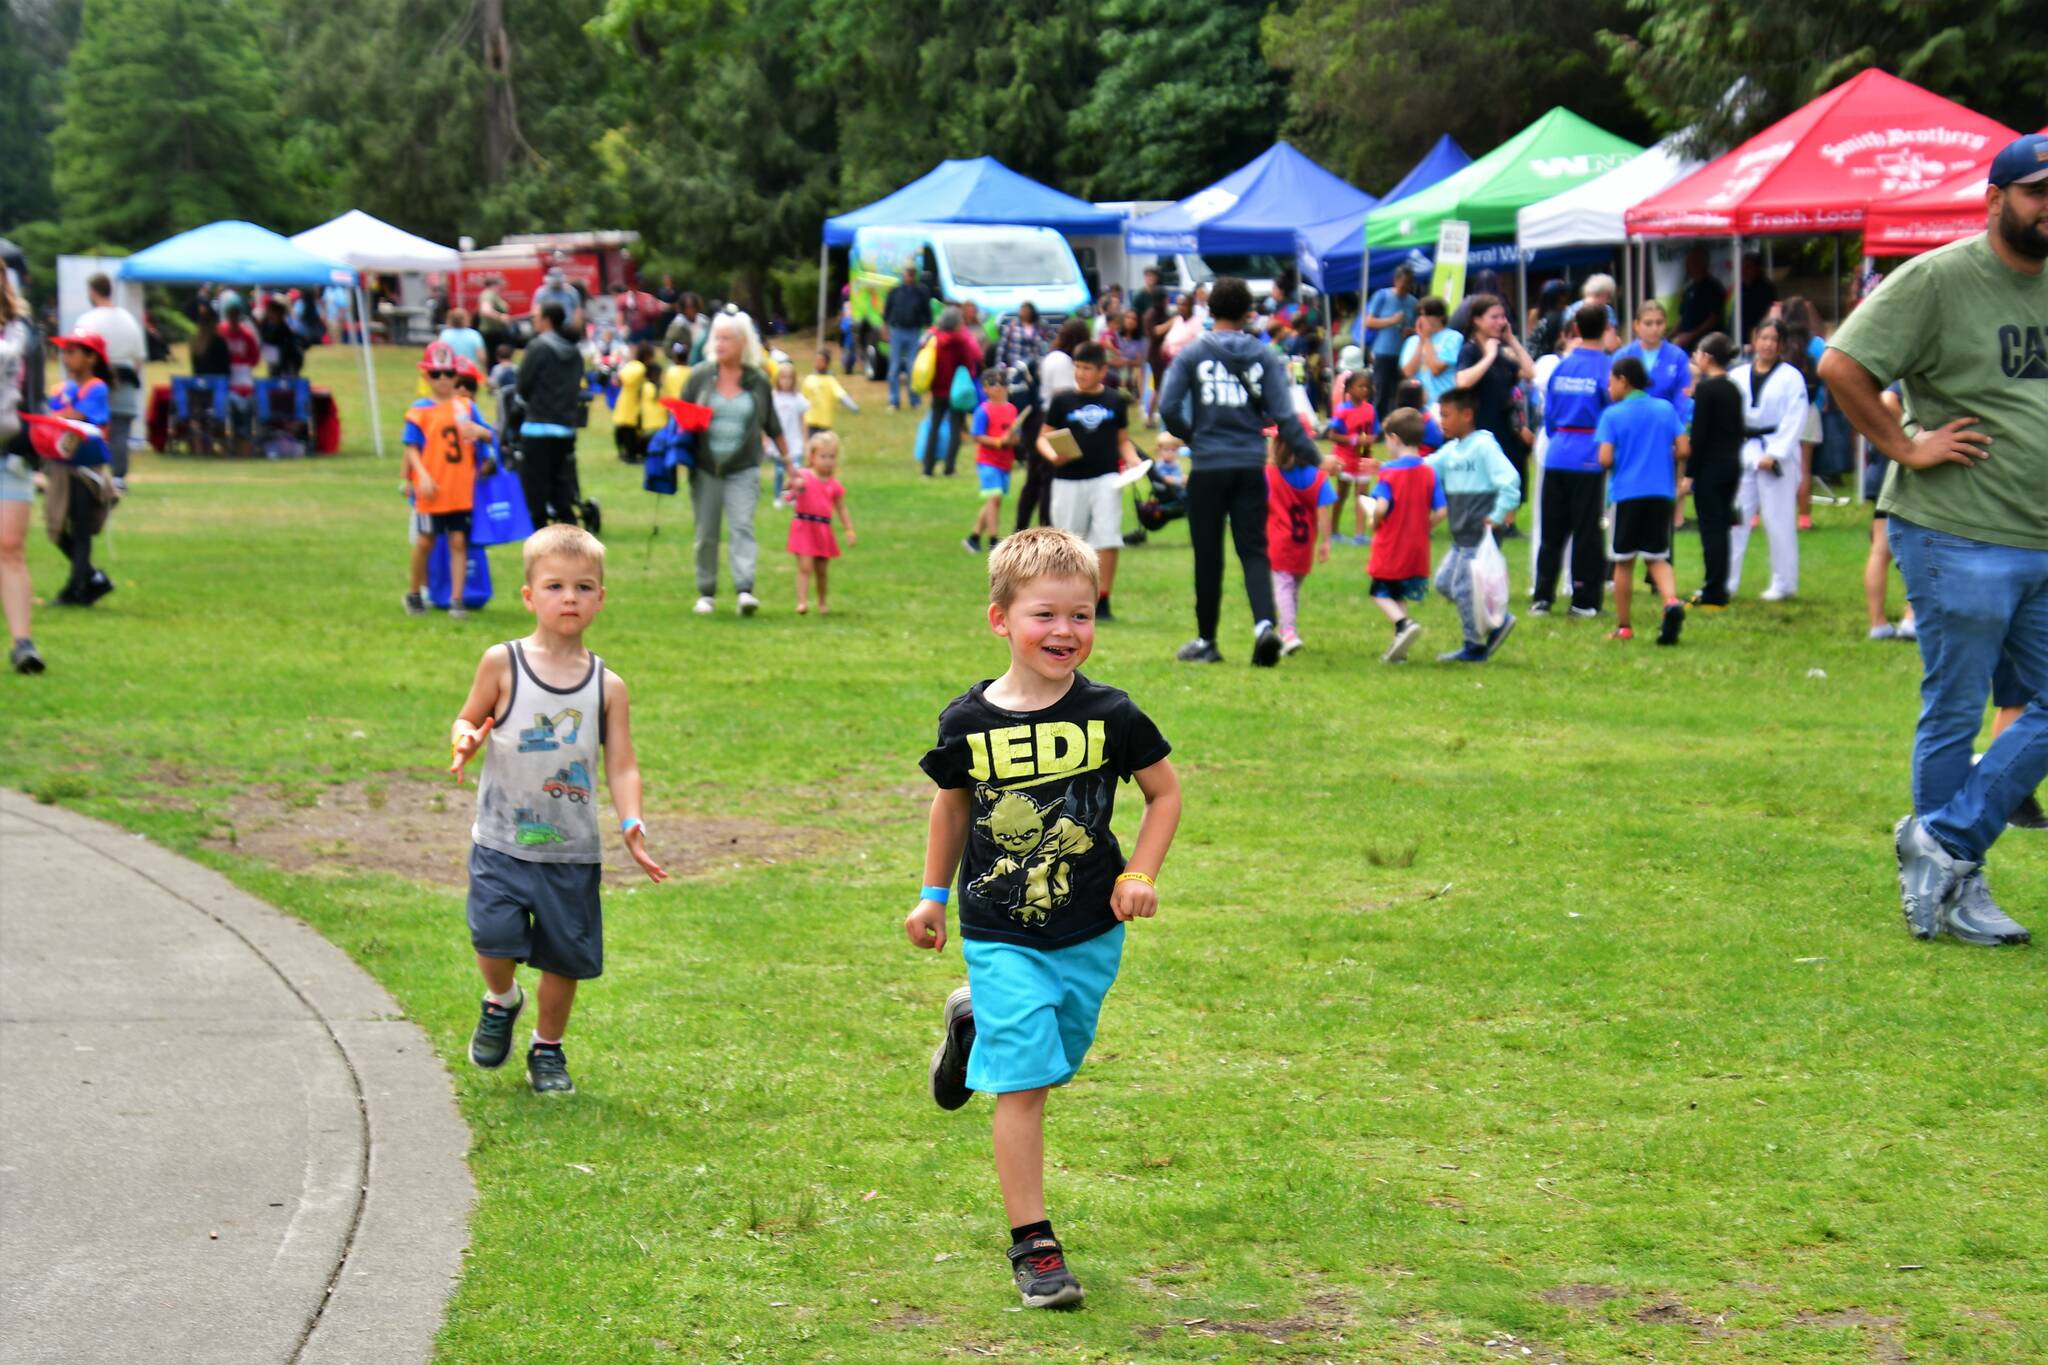 Steel Lake Park was packed with kids and families enjoying Kids’ Day on Aug. 9. Photos courtesy Bruce Honda.
 .
 .
 .